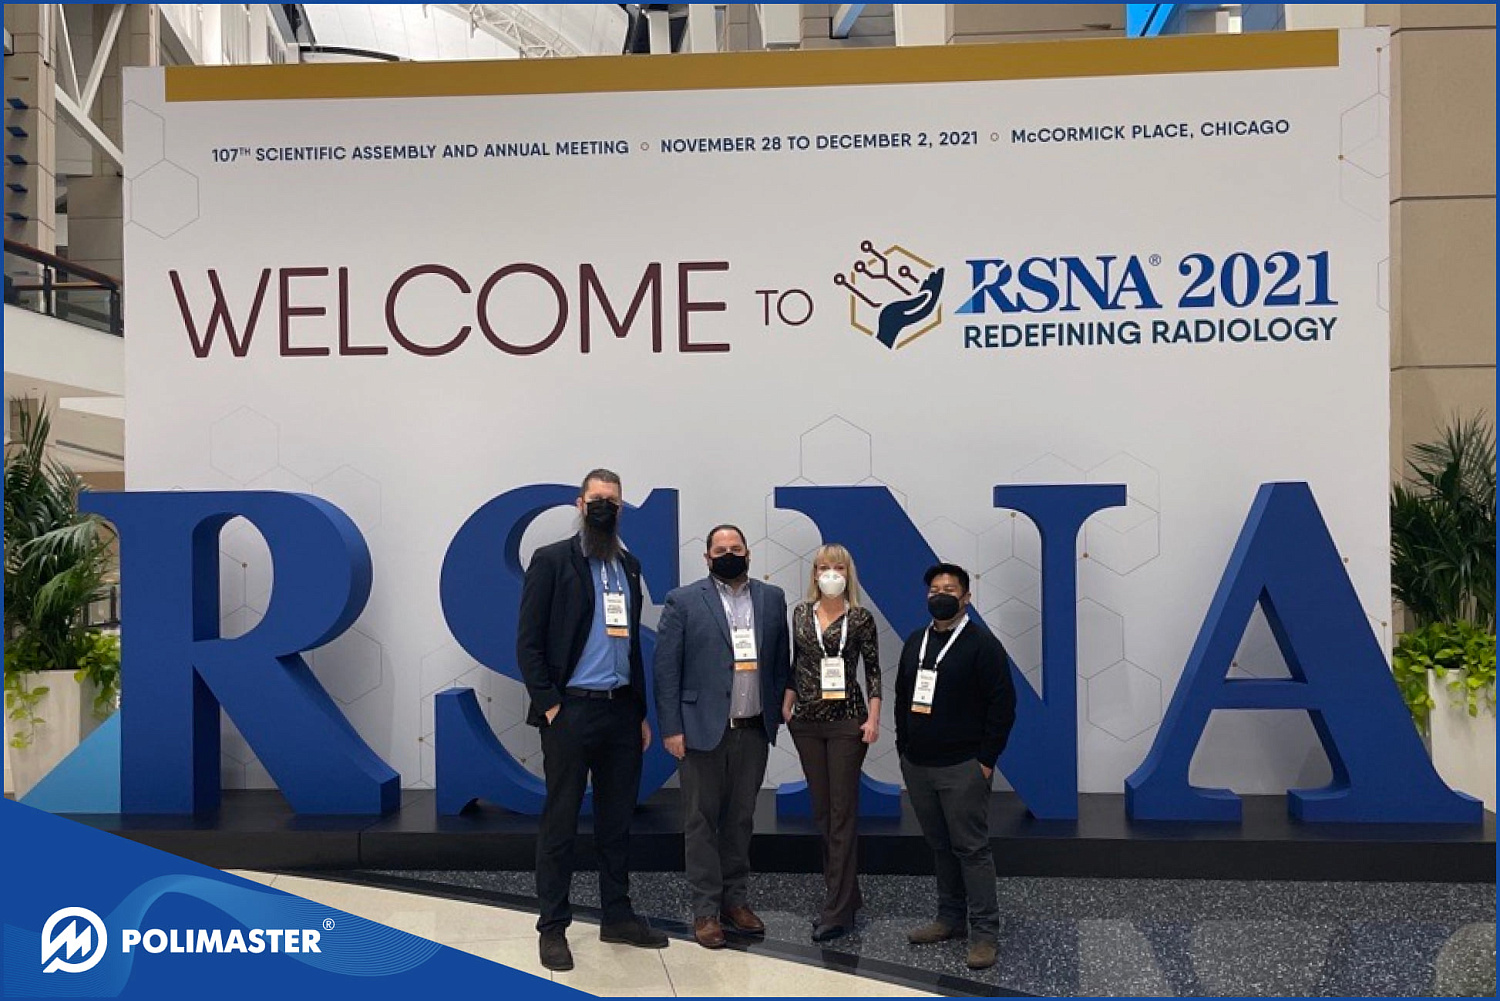 POLIMASTER at the RSNA21 in Chicago